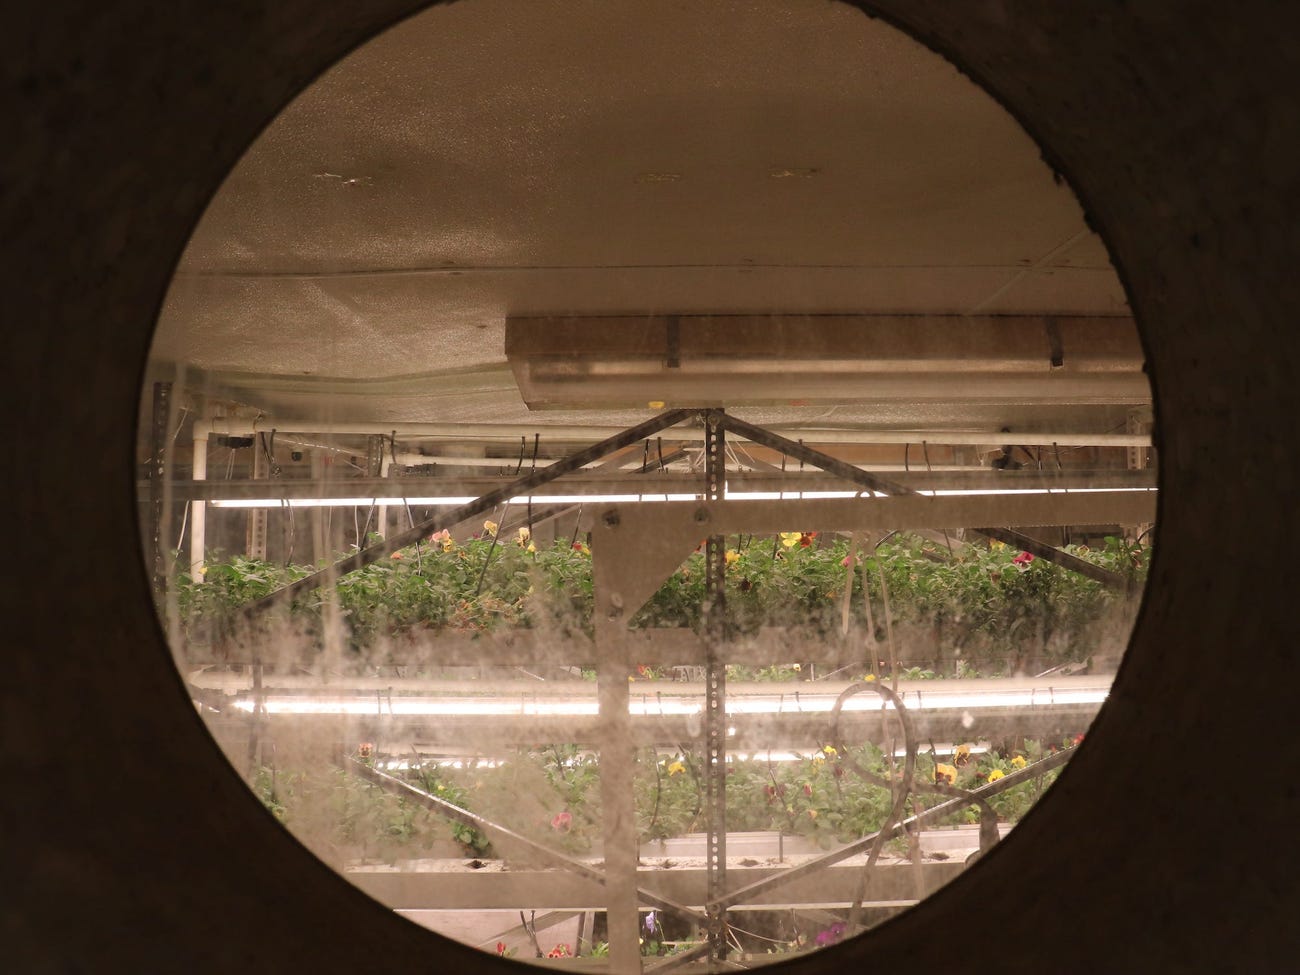 rows of green plants with yellow flowers growing on shelves beneath led grow lights in a basement visible through a circular hole in a concrete wall